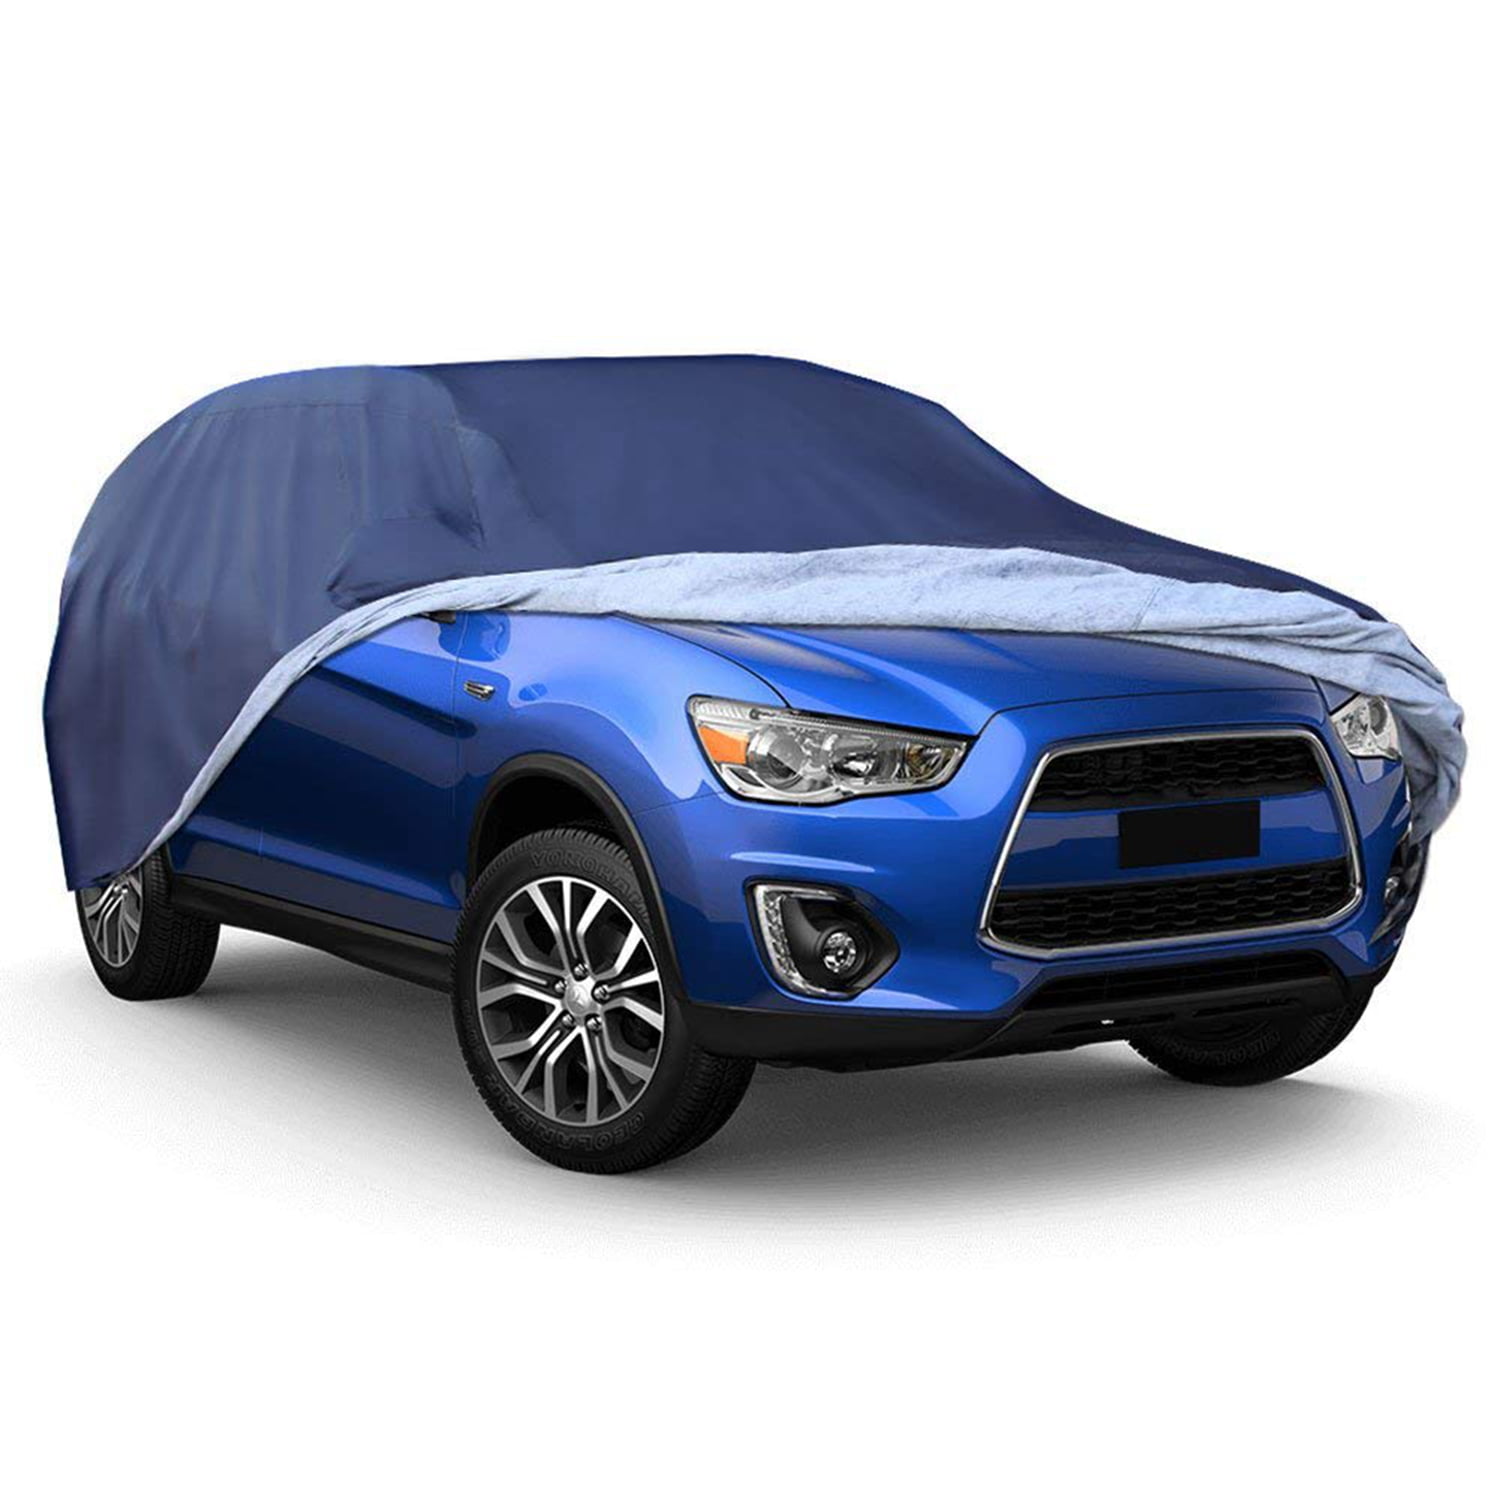 Nissan Juke Car Cover Breathable UV Protect Indoor Outdoor